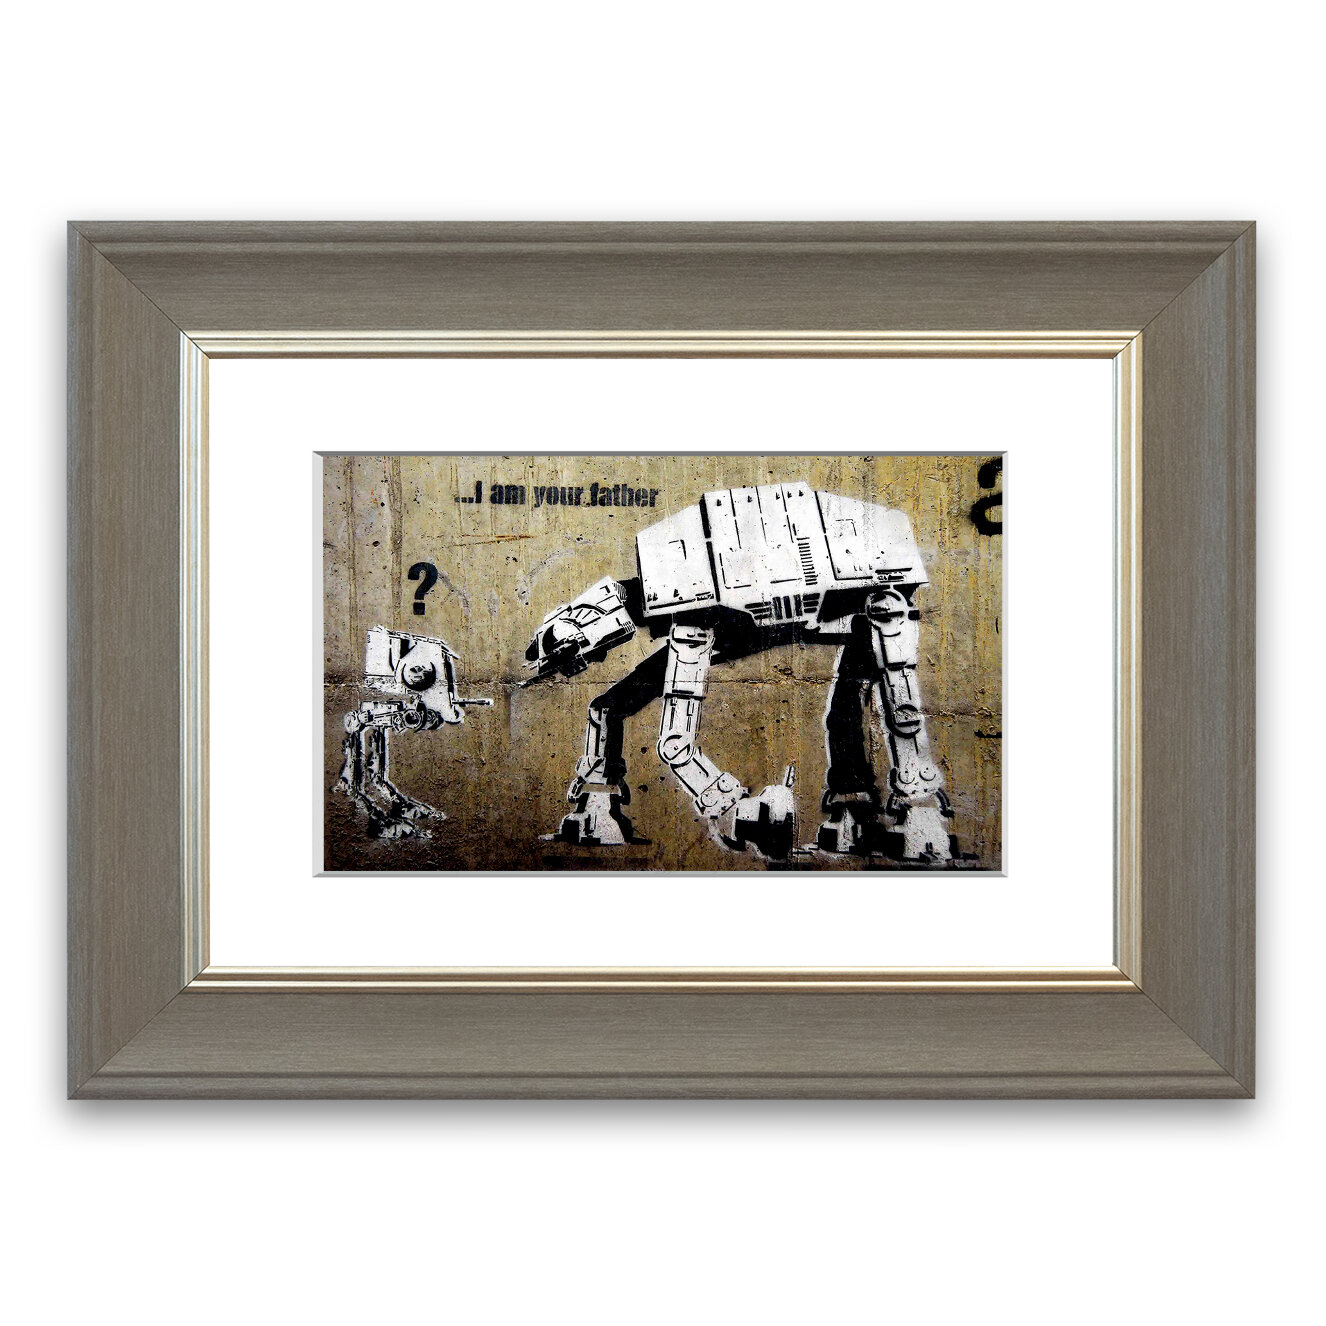 East Urban Home Atat I Am Your Father Banksy Canvasb L Cornwall Banksy Framed Photographic Print Wayfair Co Uk